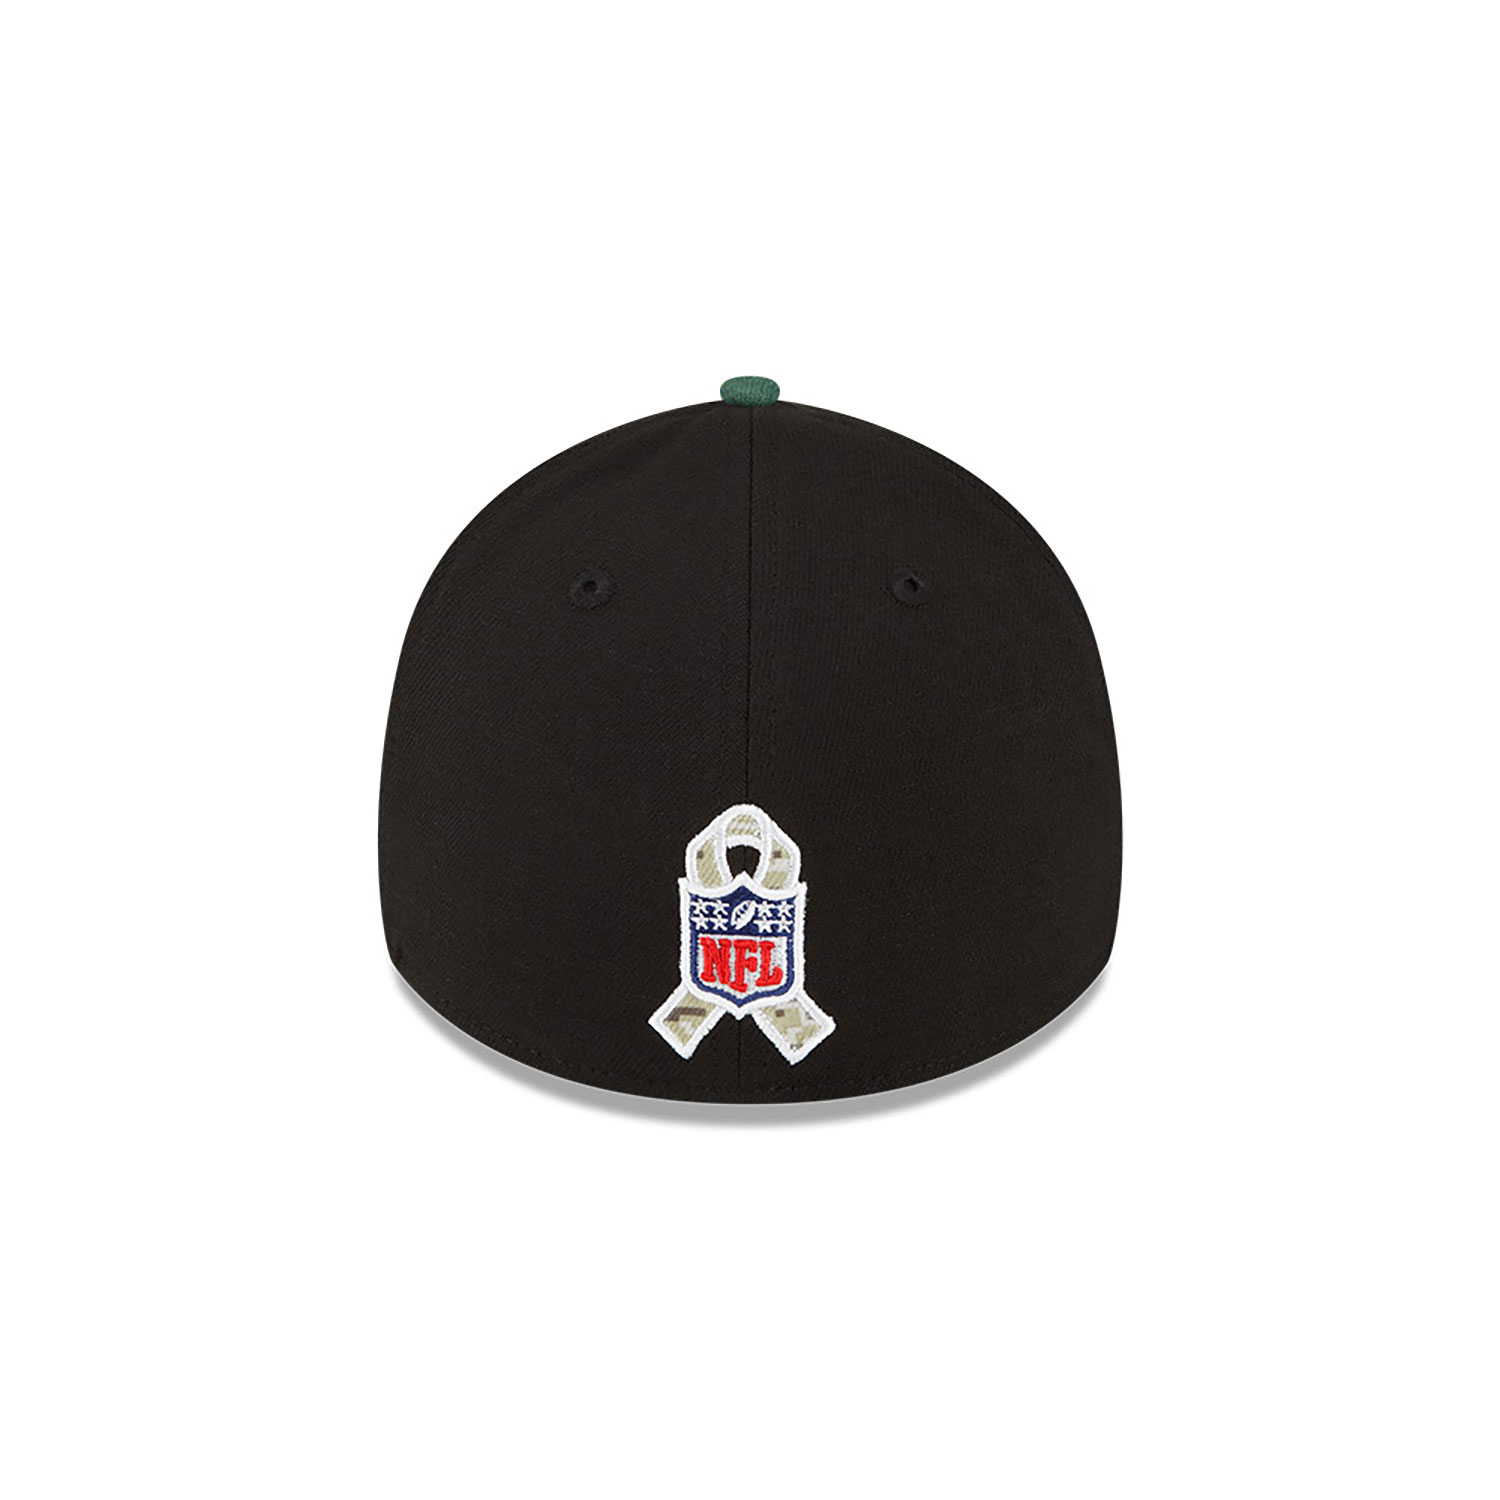 Green Bay Packers NFL Salute to Service Black 39THIRTY Stretch Fit Cap